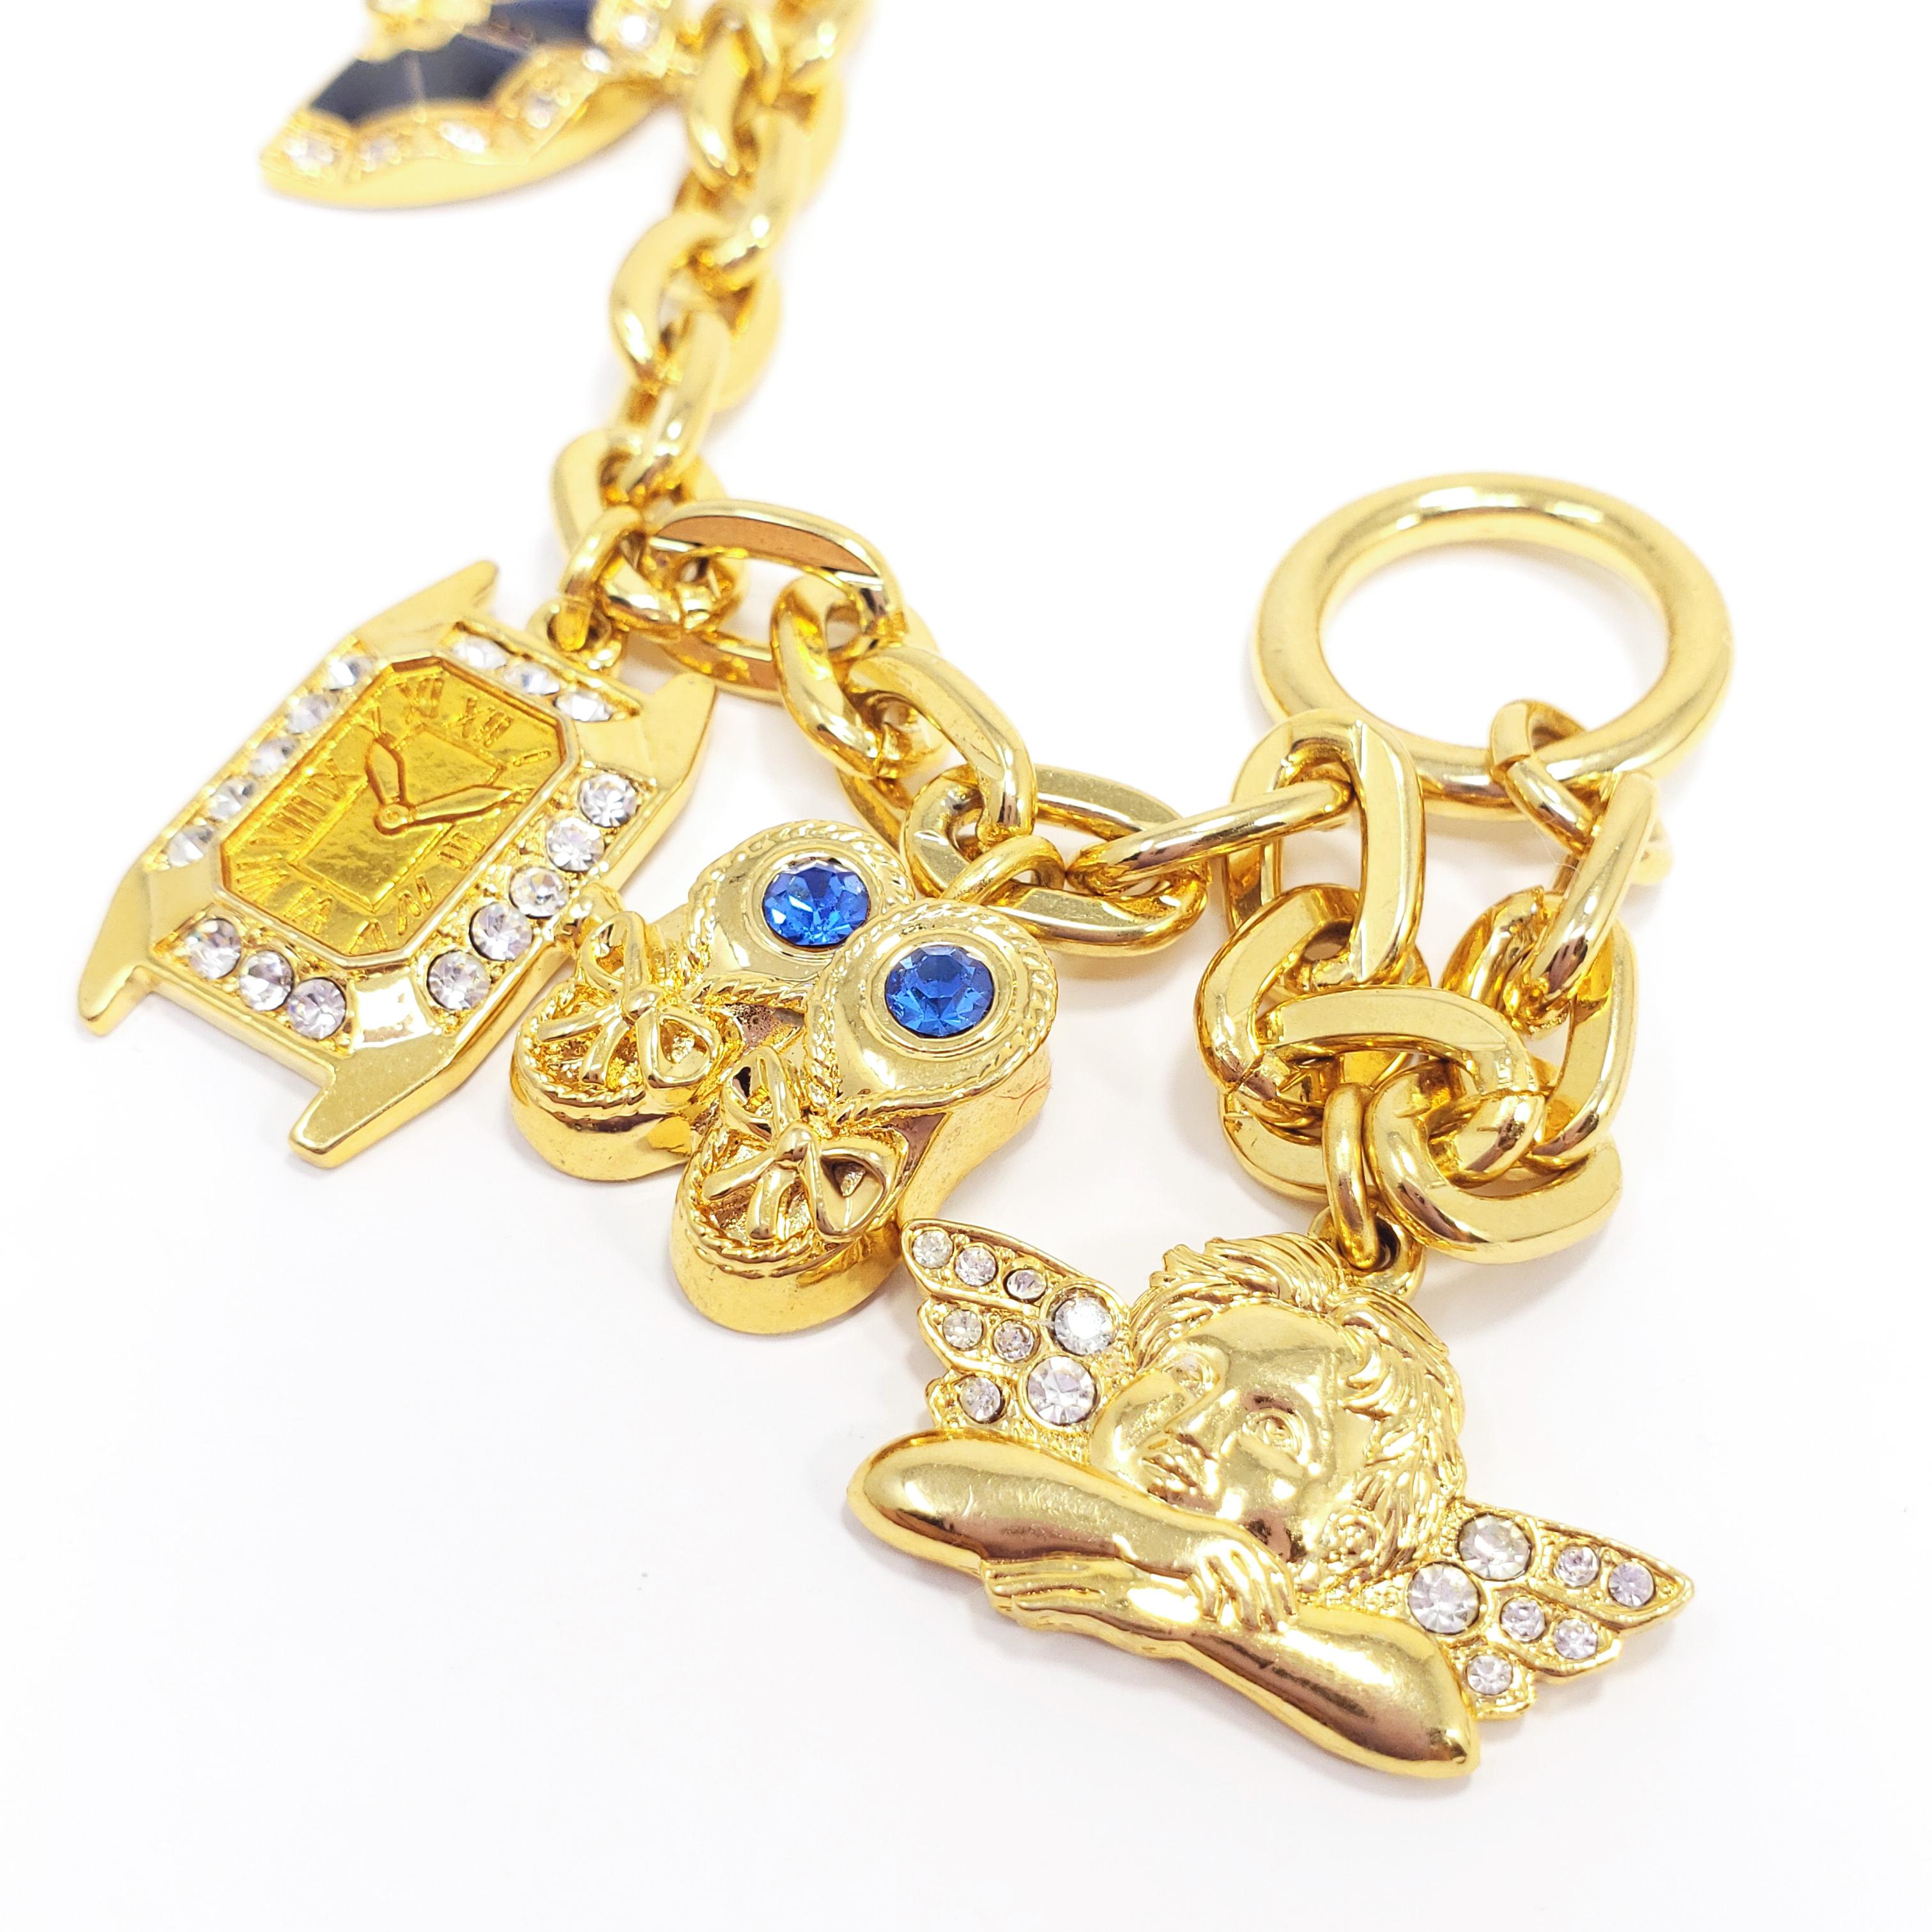 A gold-plated chain bracelet with five charms - a ladybug, a hand fan, a clock, a pair of shoes, and an angel. Accented with crystals and enamel, fastened with a toggle clasp. By Kenneth Jay Lane.

Hallmarks: © KJL